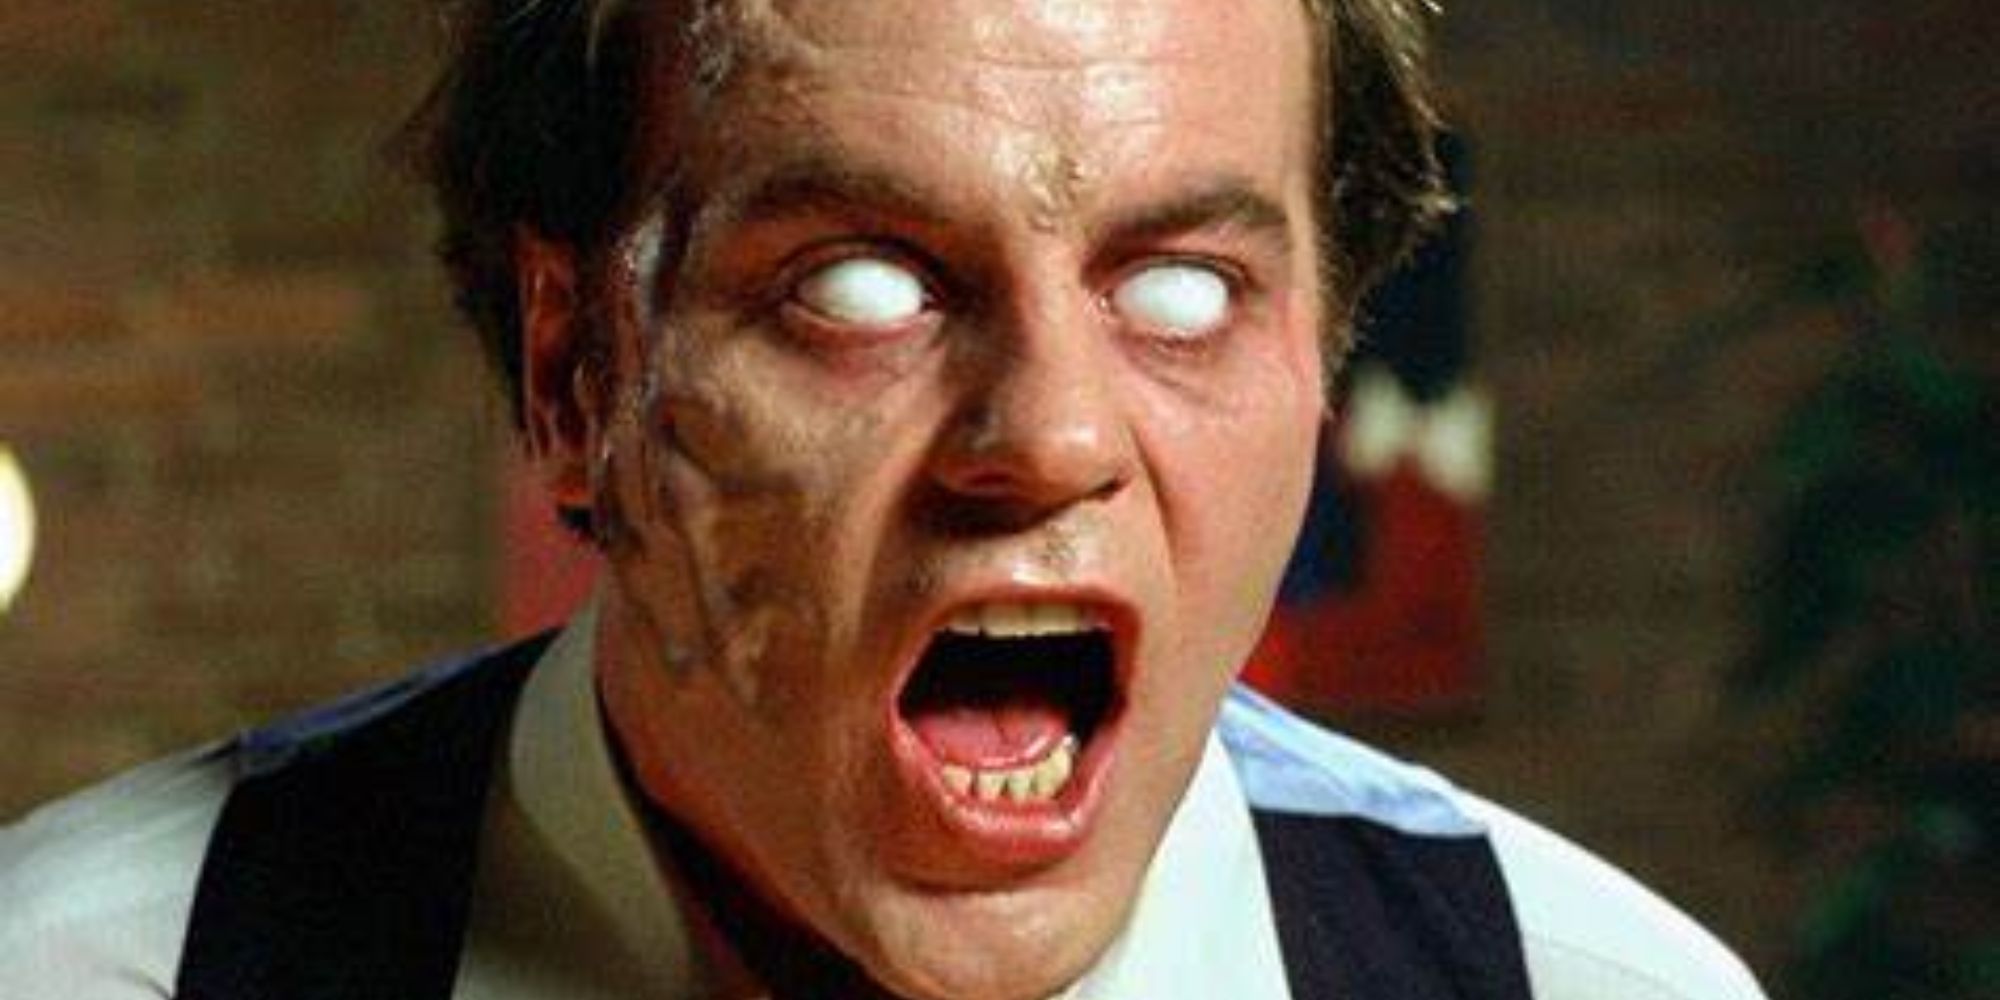 Darryl Revok, played by Michael Ironside, with white eyes and his mouth open in Scanners